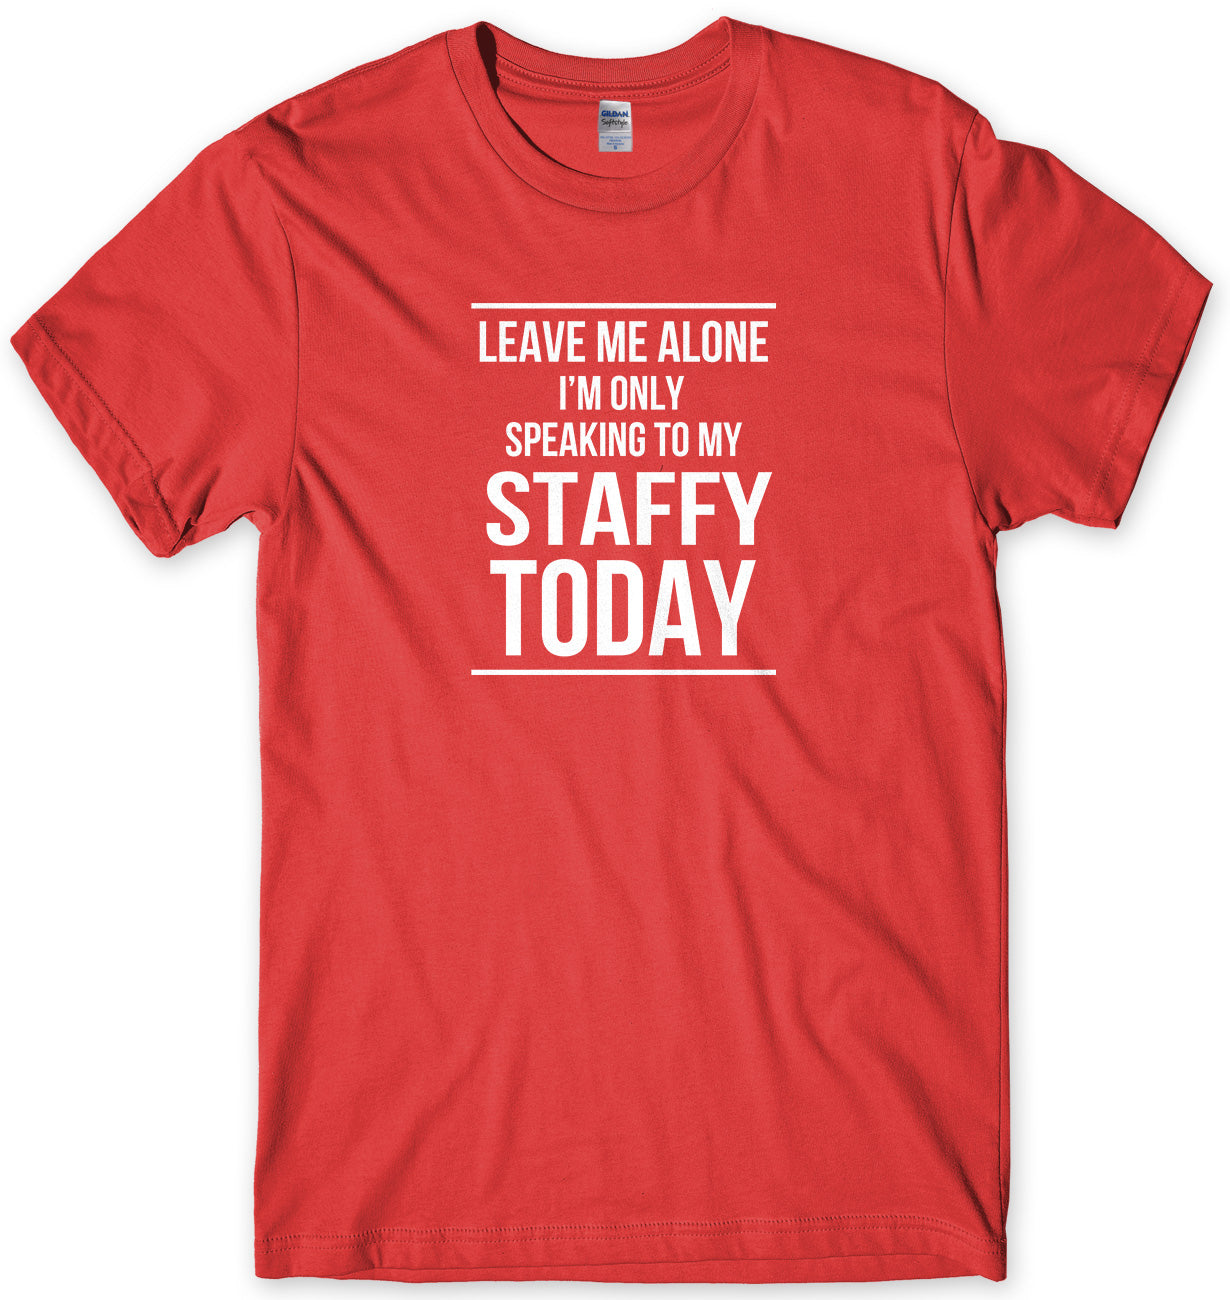 LEAVE ME ALONE I'M ONLY SPEAKING TO MY STAFFY TODAY MENS FUNNY SLOGAN UNISEX T-SHIRT